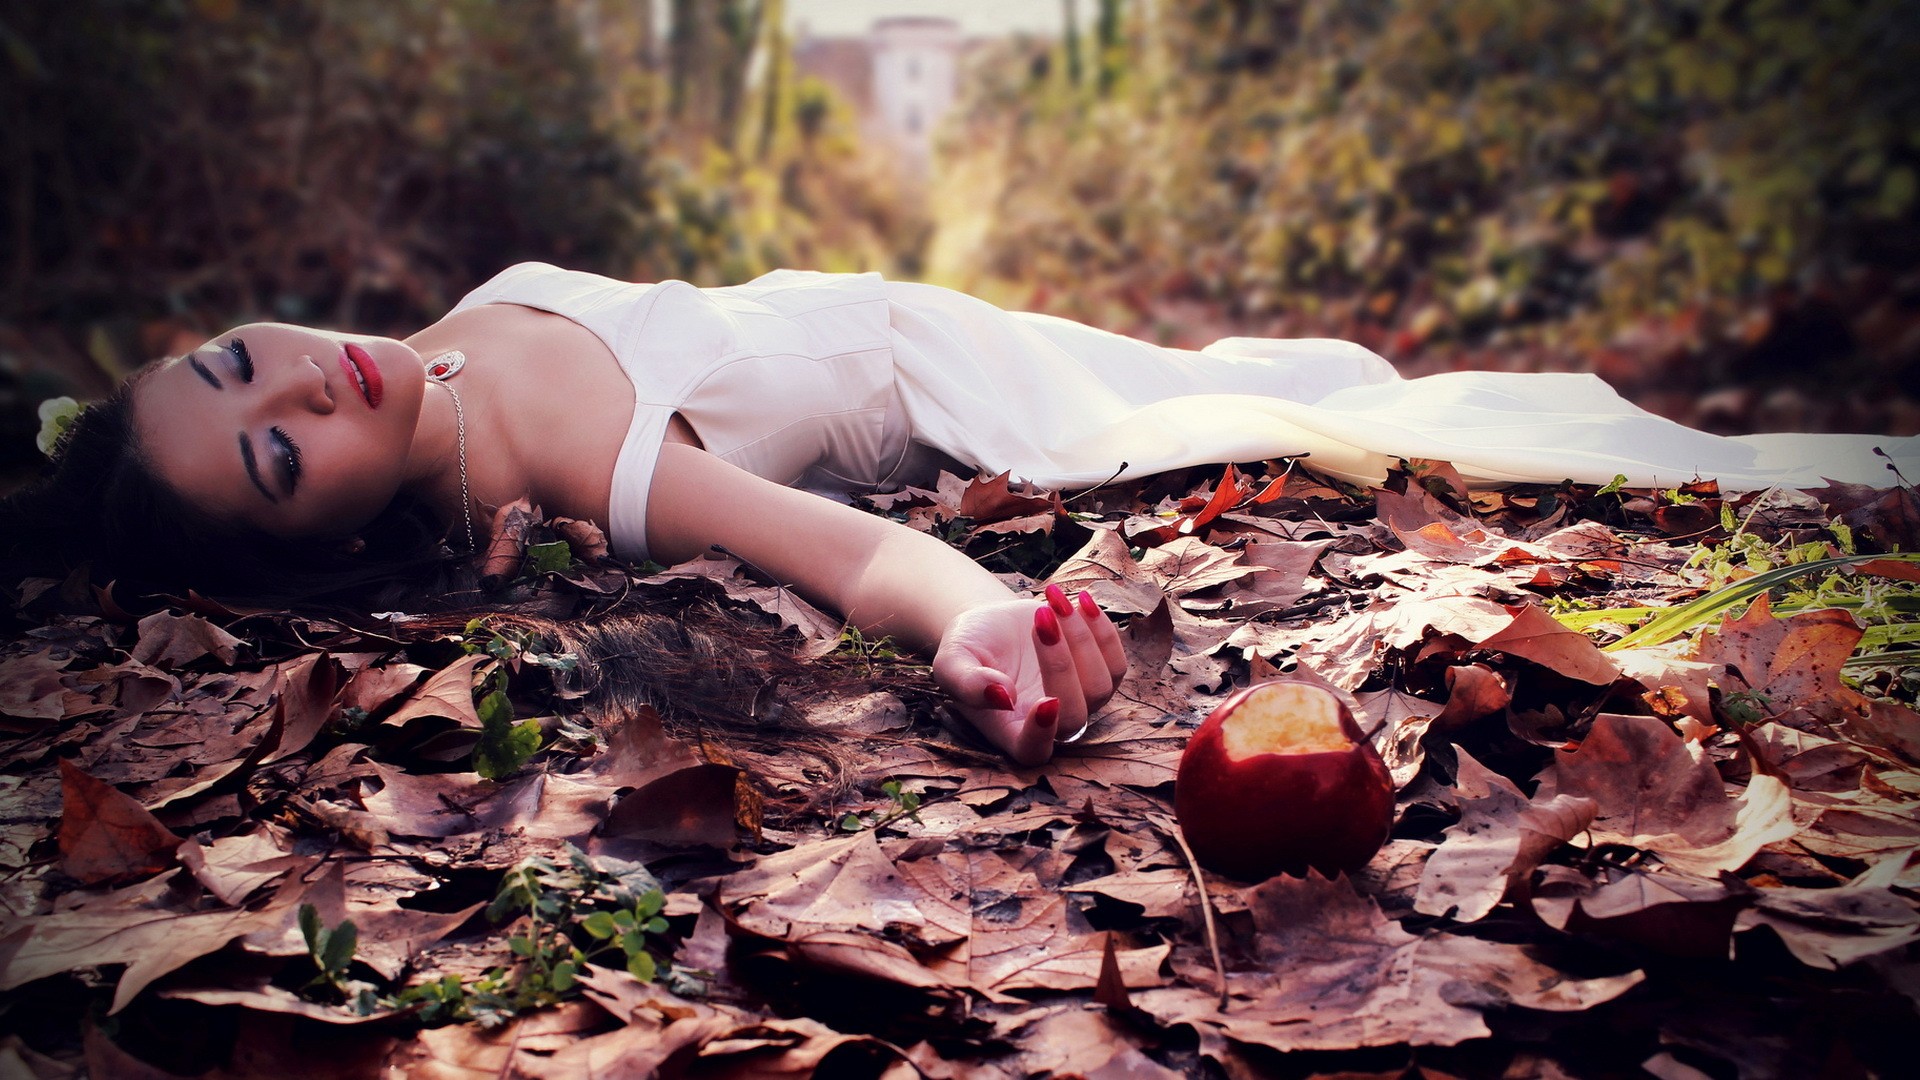 People 1920x1080 women outdoors women model brunette white dress Asian makeup fallen leaves red nails painted nails food necklace fantasy girl apples lying on back